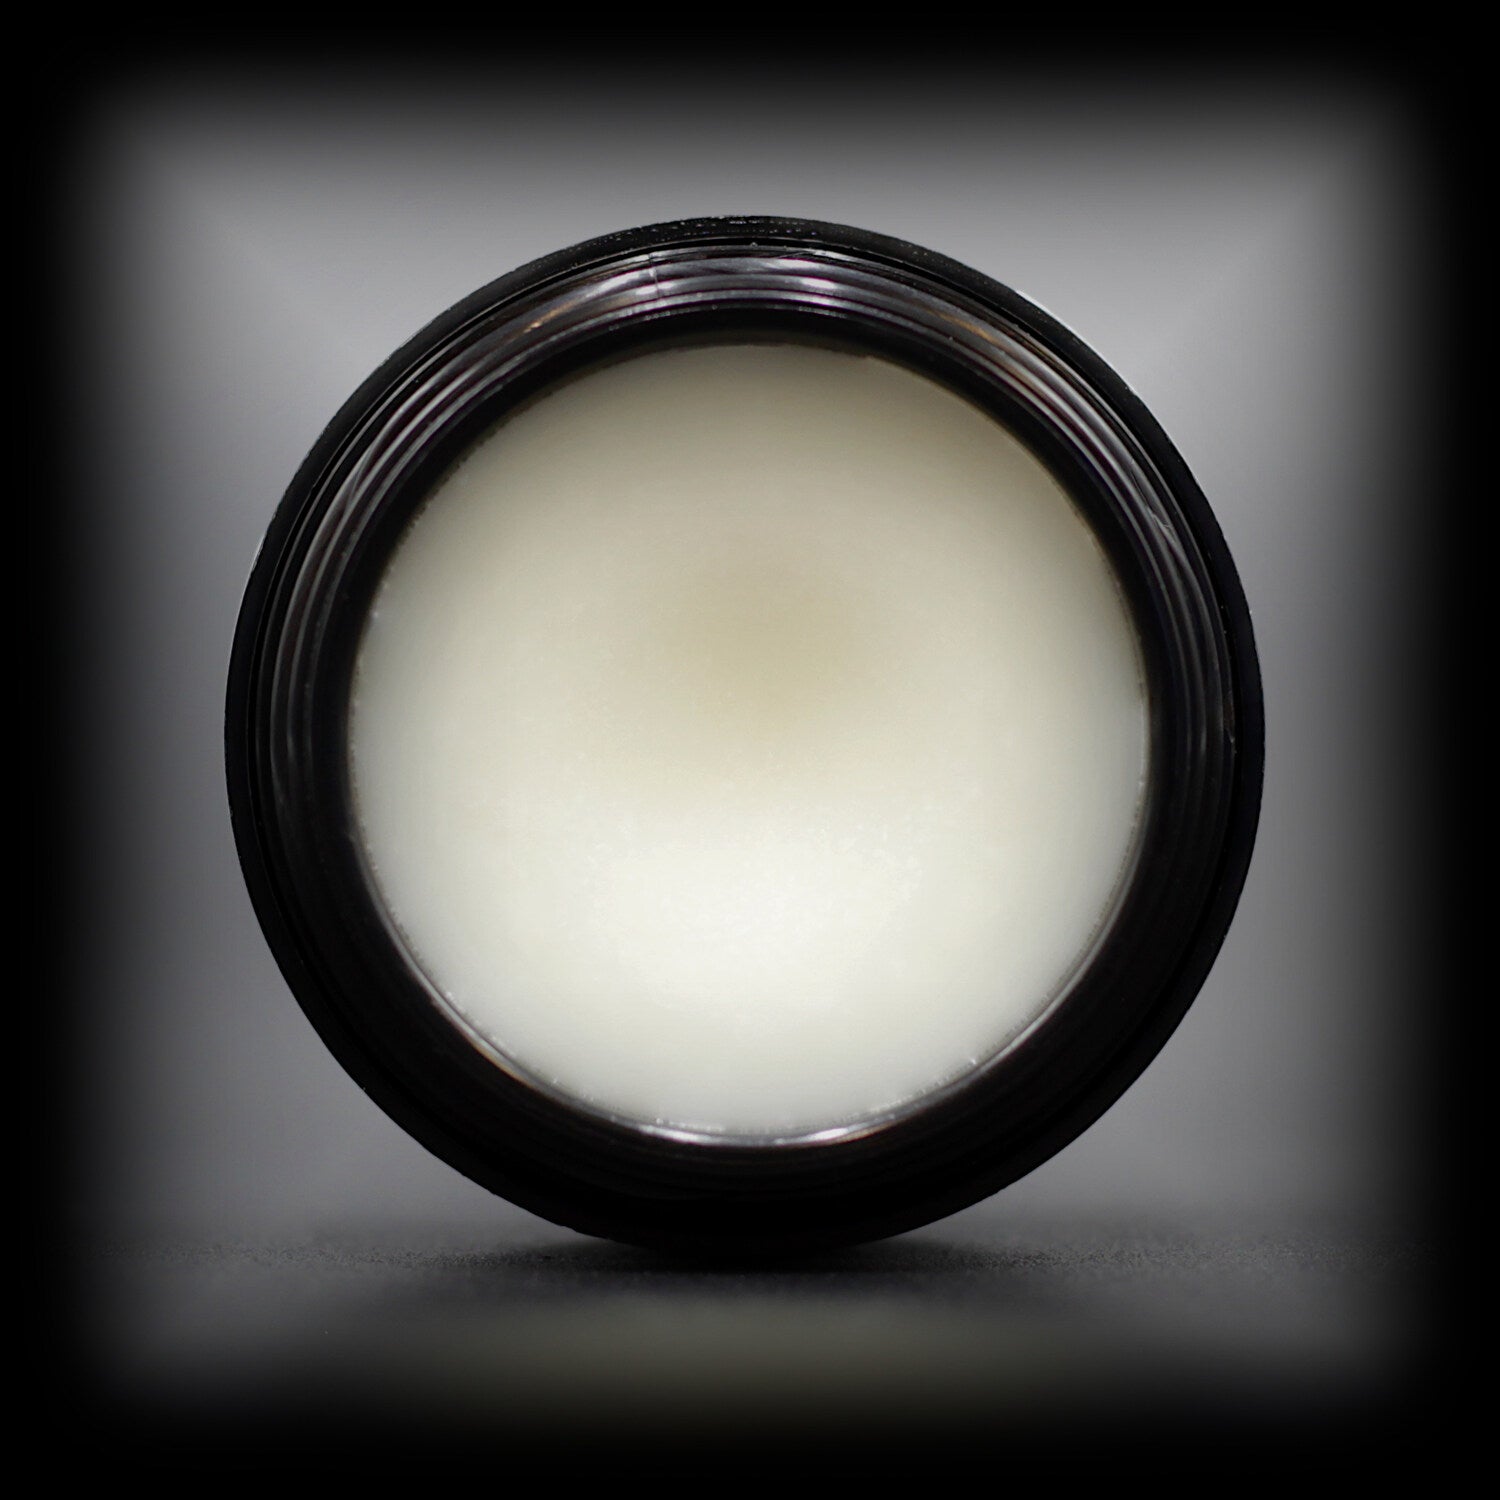 Naturally Wicked Pineapple Lip Balm With Lid Removed, Exposing Beautiful White, Lip Plumping Balm